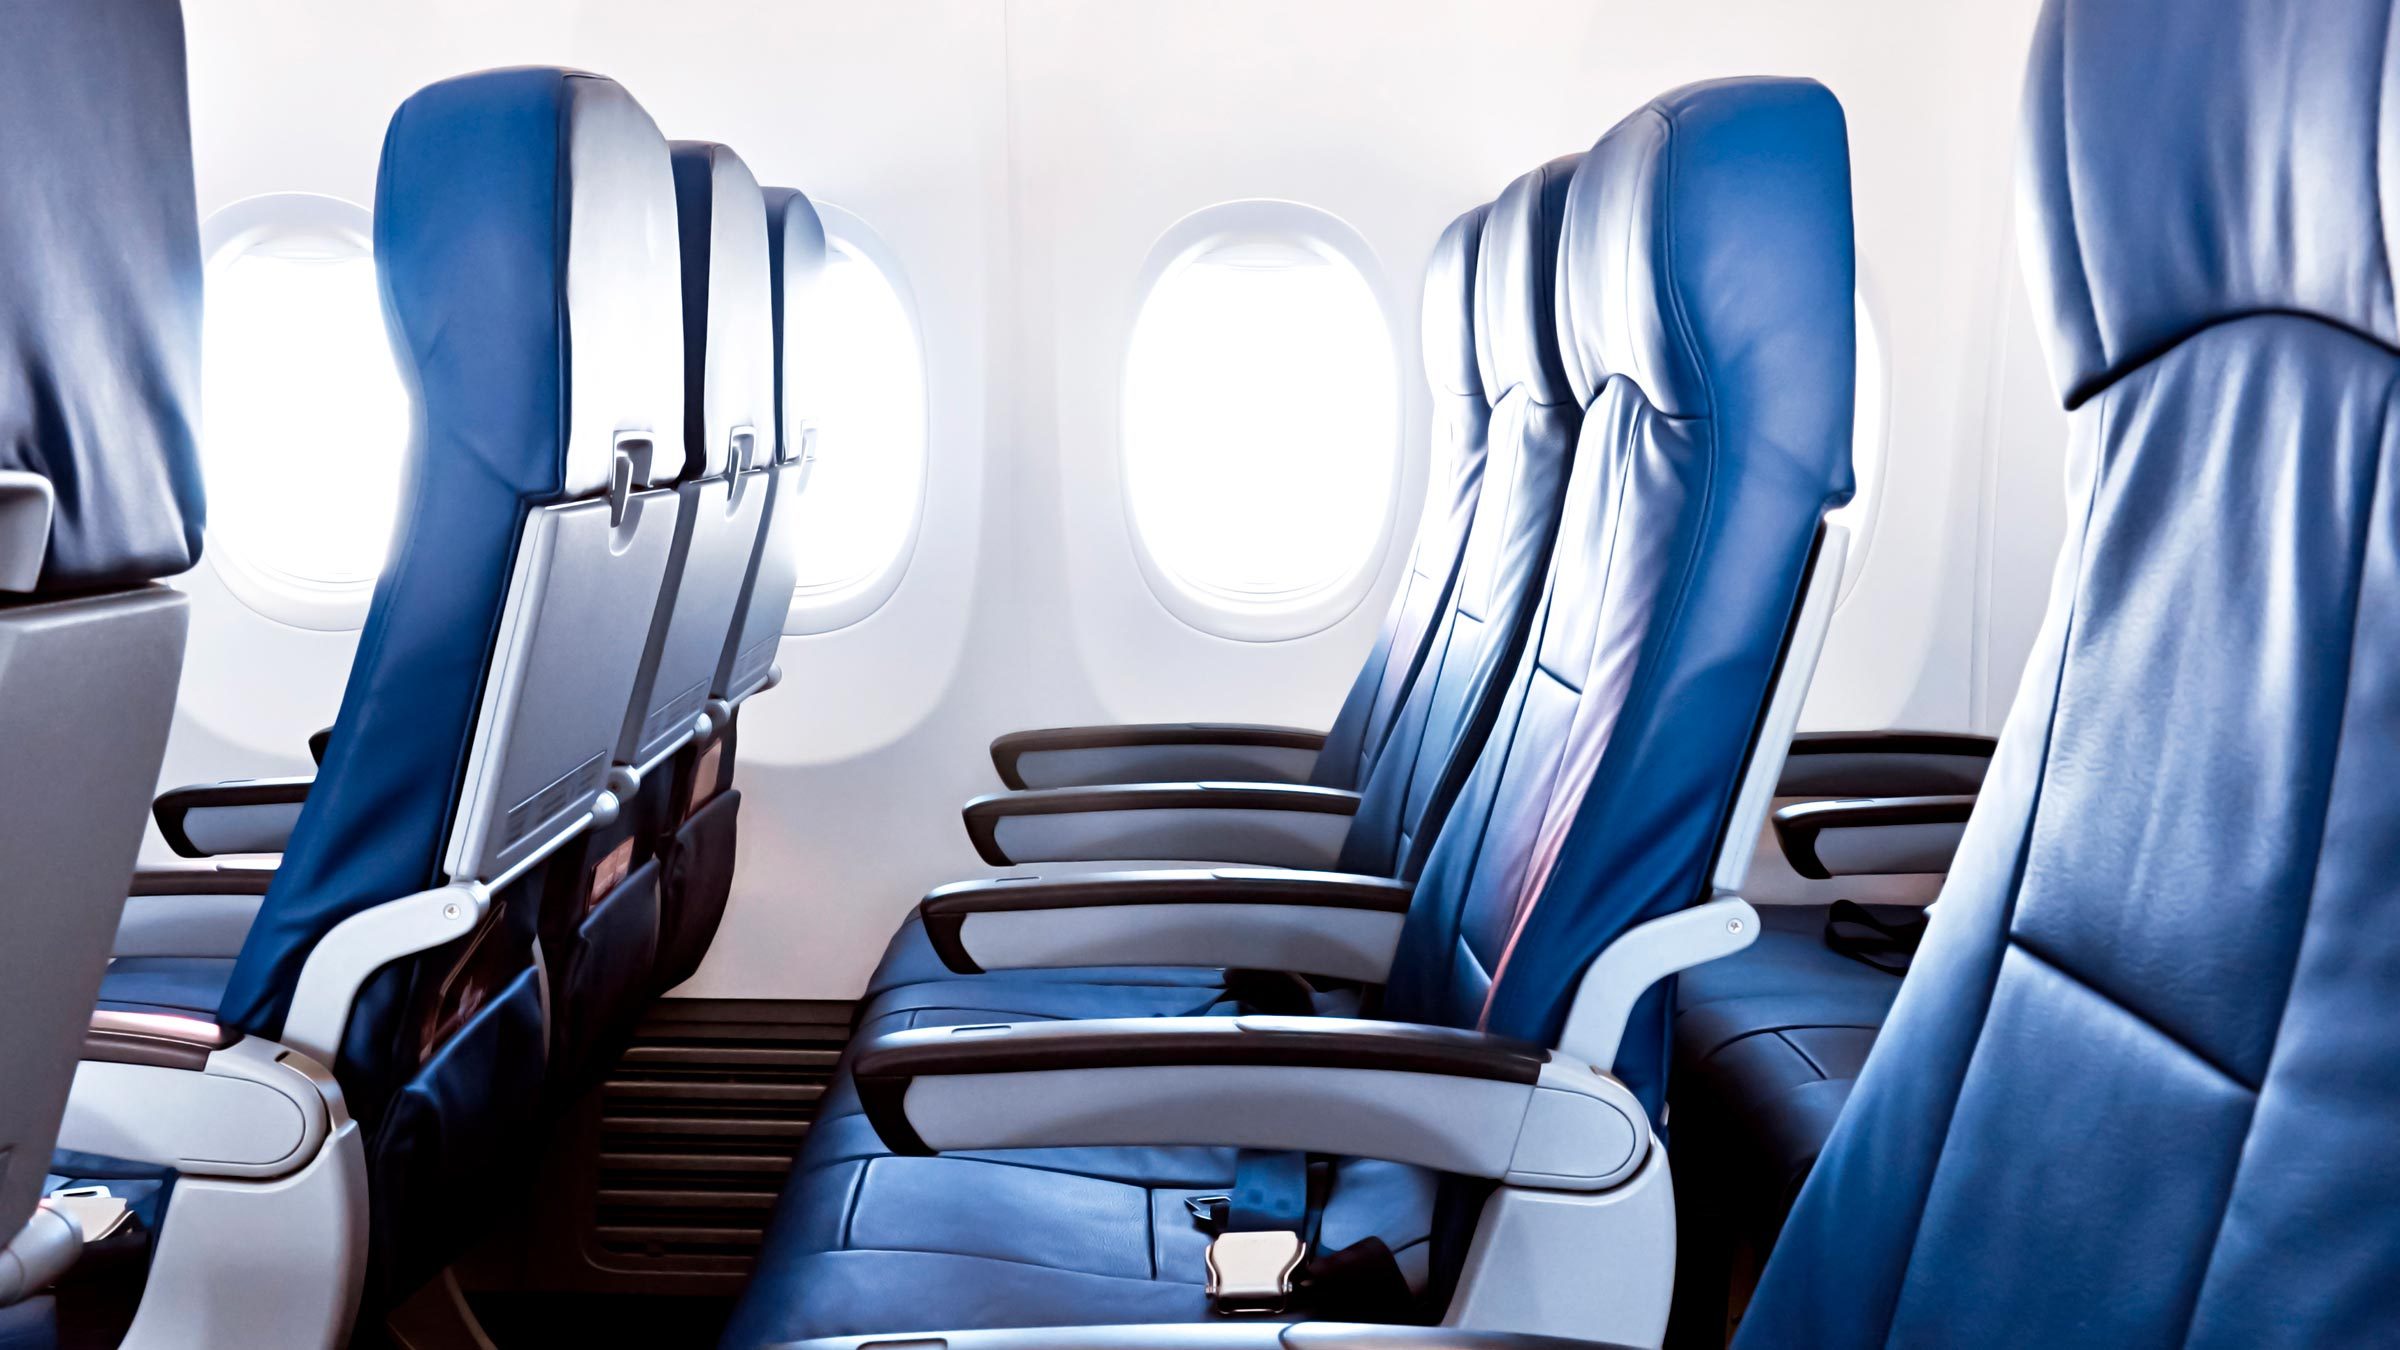 Why Are Most Airplane Seats Blue? Reader's Digest